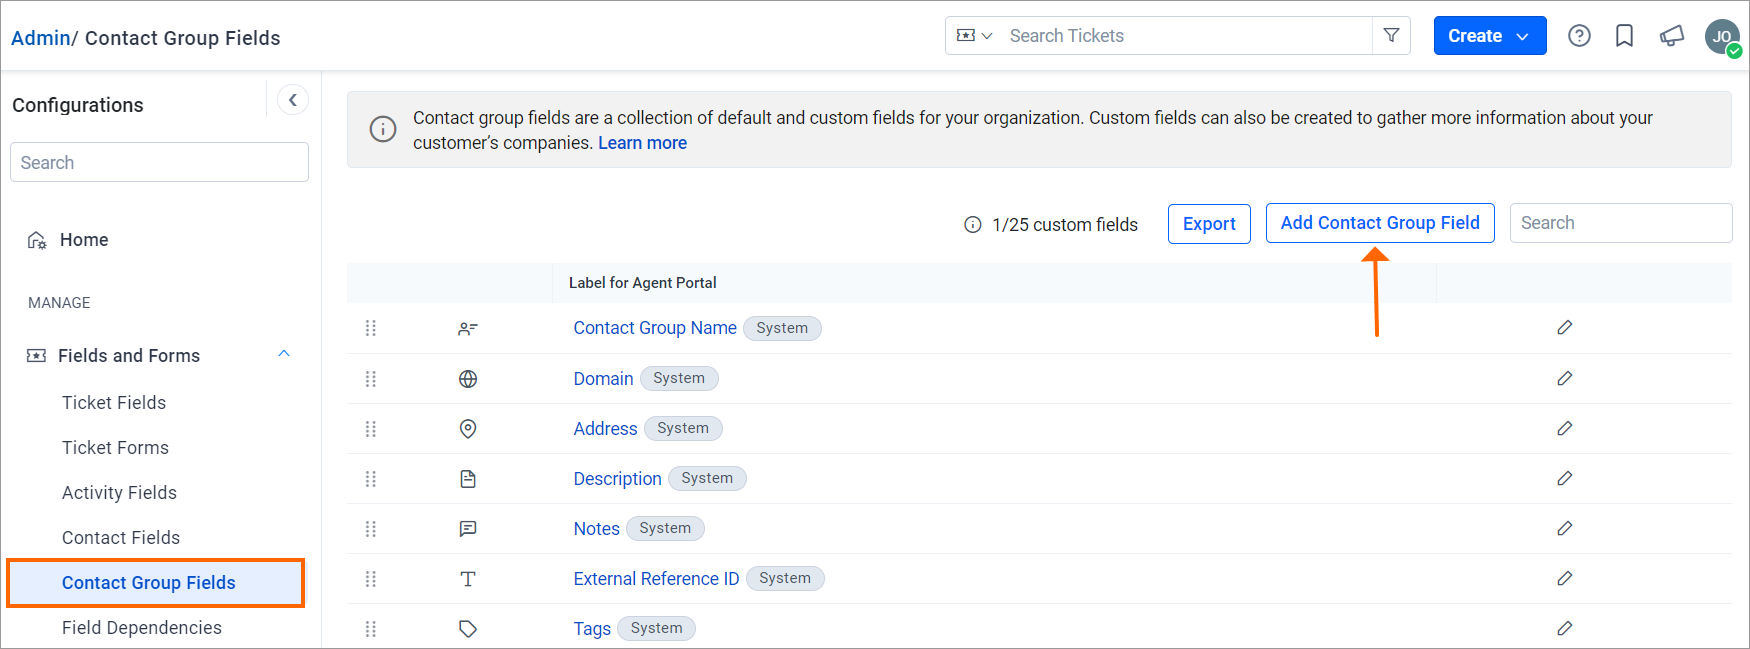 Default_and_Custom_Contact_Group_Fields_List_1.png